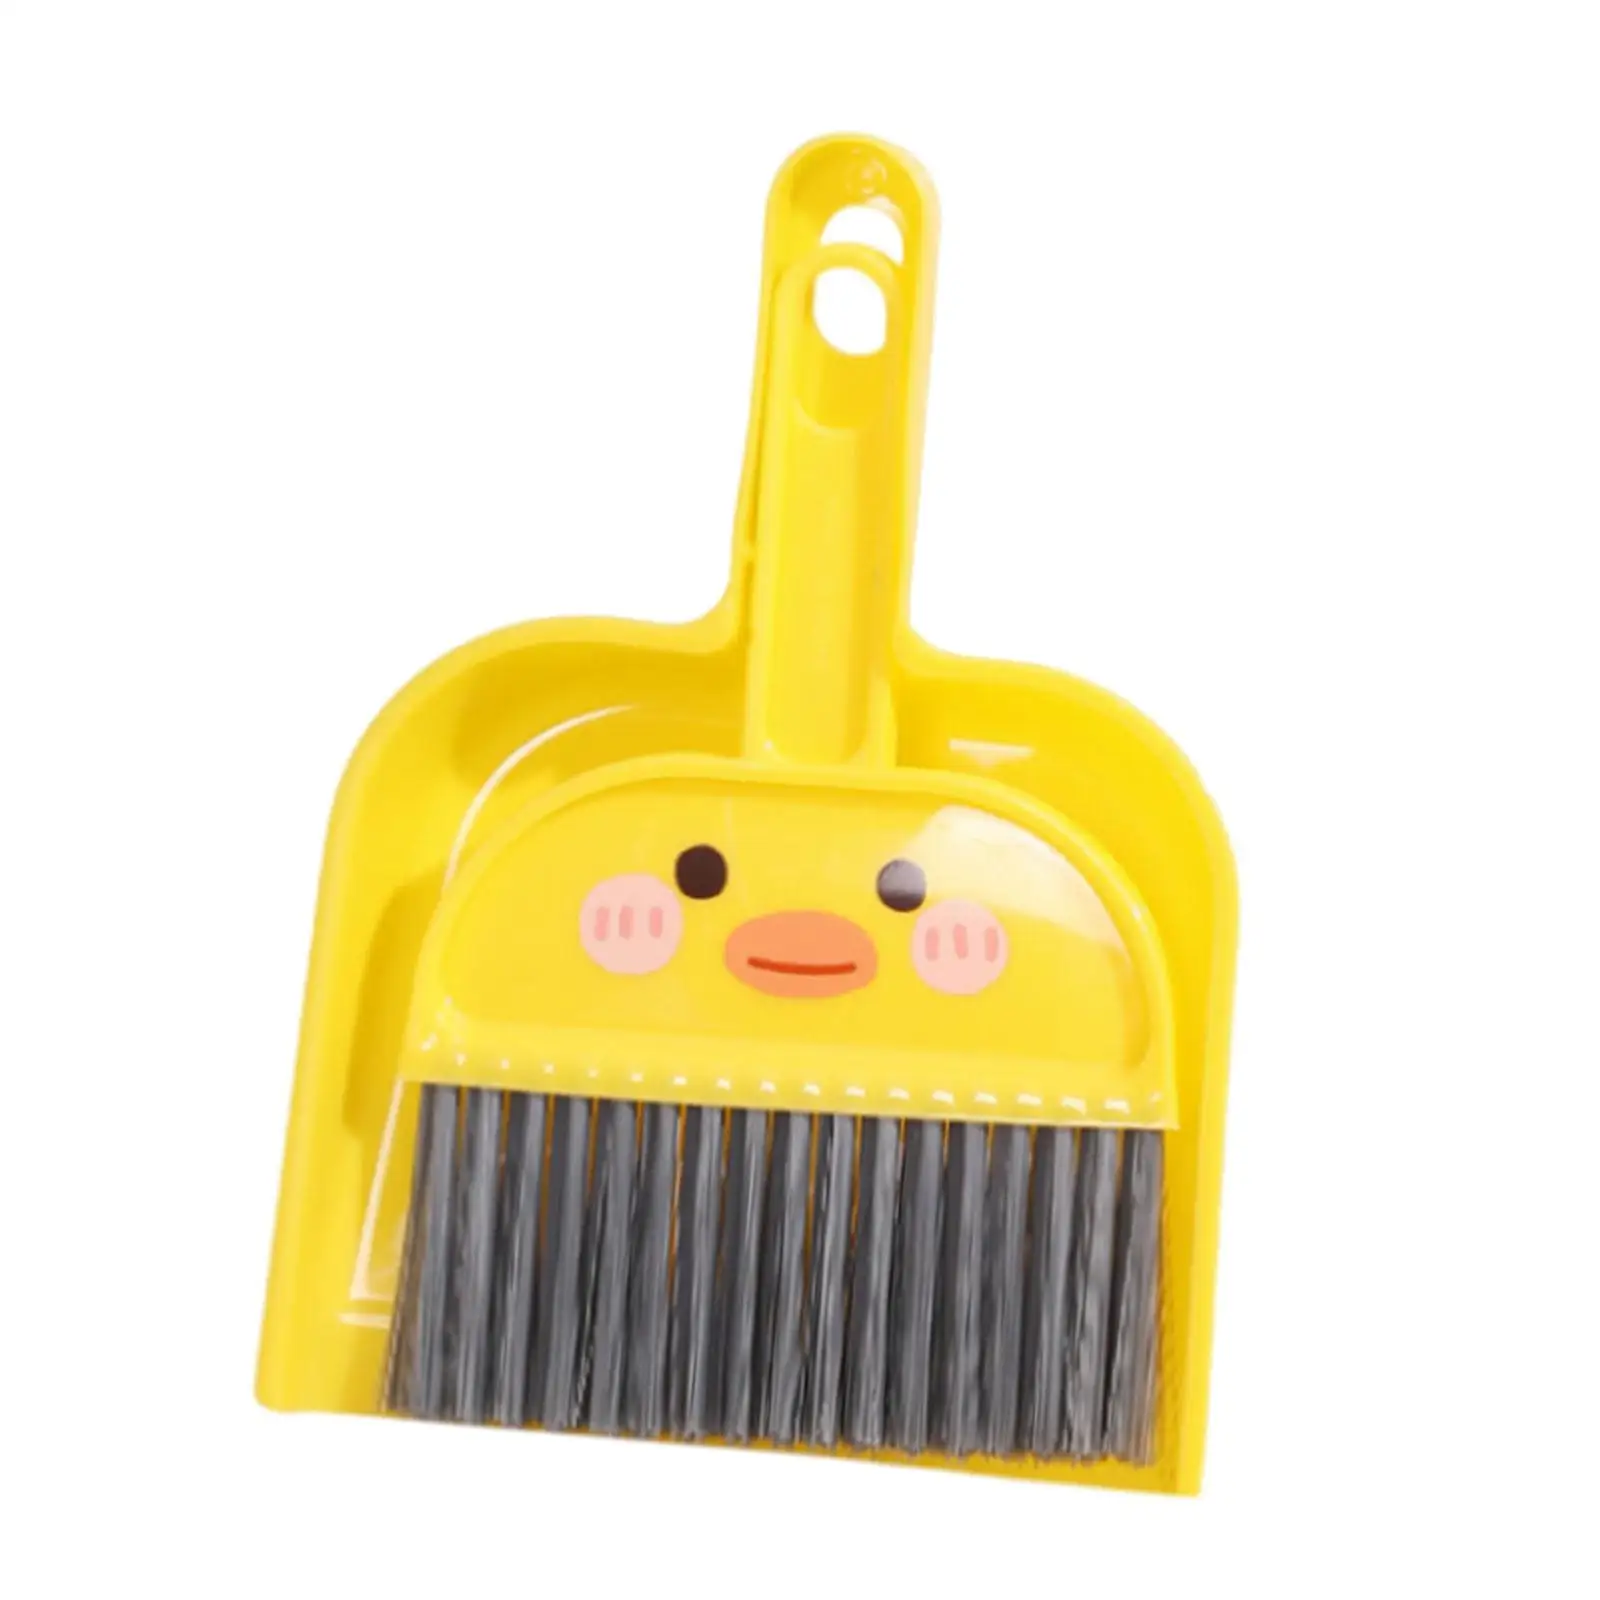 Small Dustpan and Broom Set Pretend Play Collect Dust Pan Cleaning Tool Housekeeping for Desk Seat Keyboard Carpets Sofa